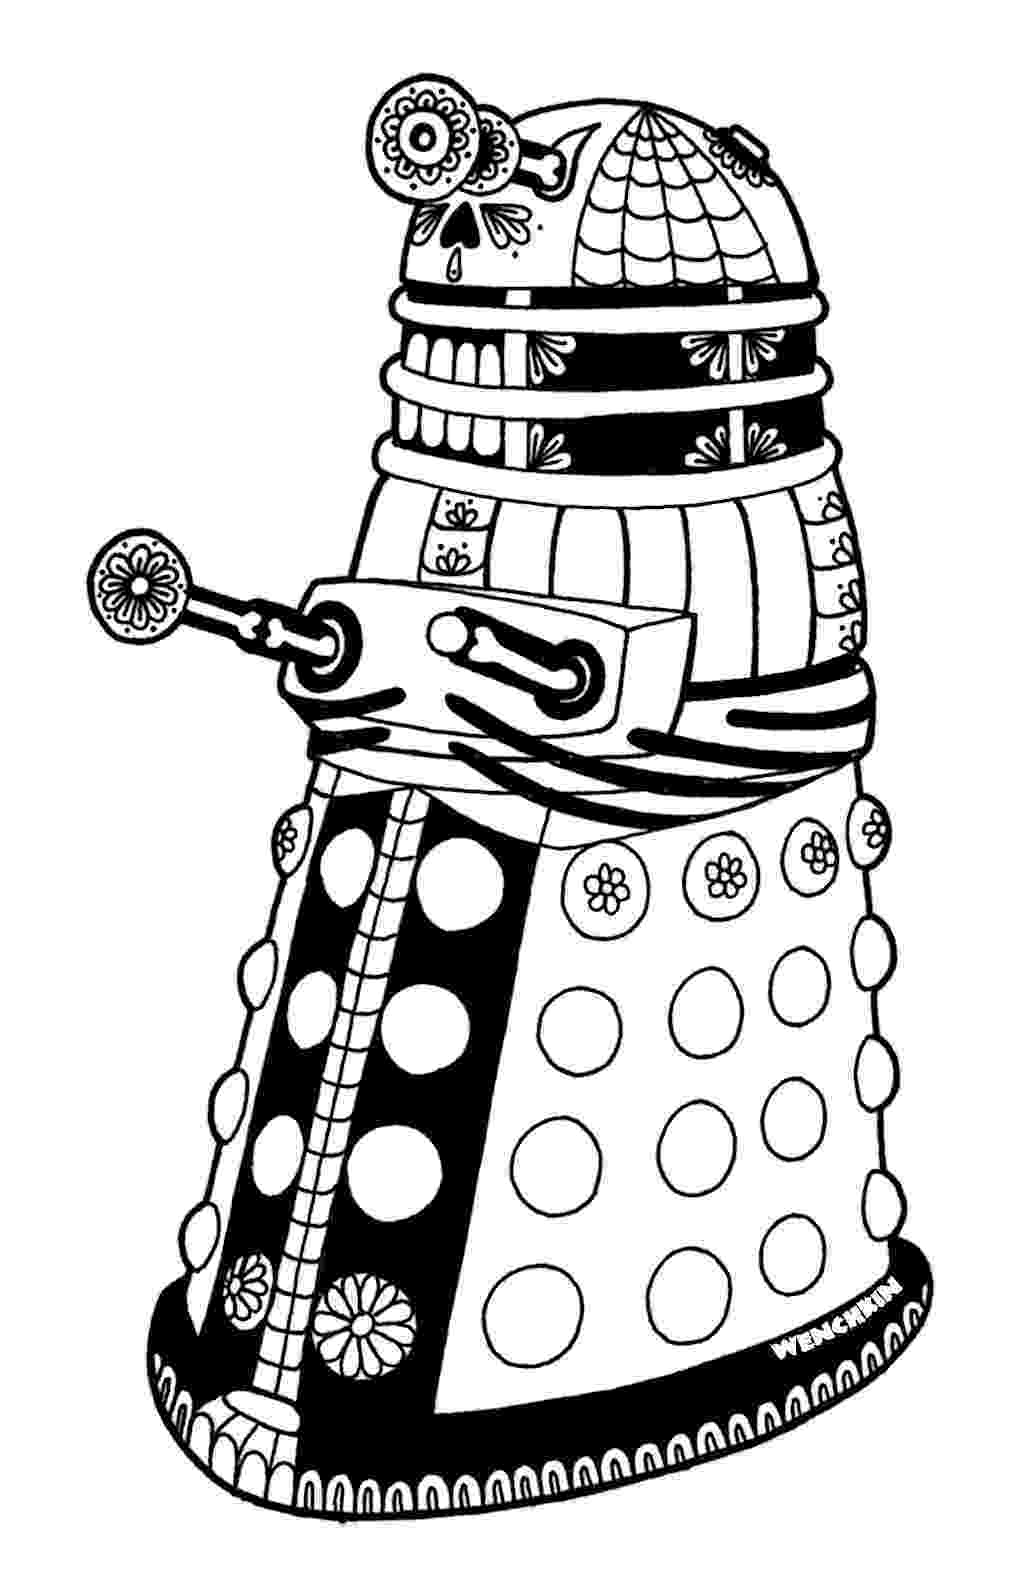 dalek coloring page yucca flats nm wenchkin39s coloring pages dia de los dalek page coloring 